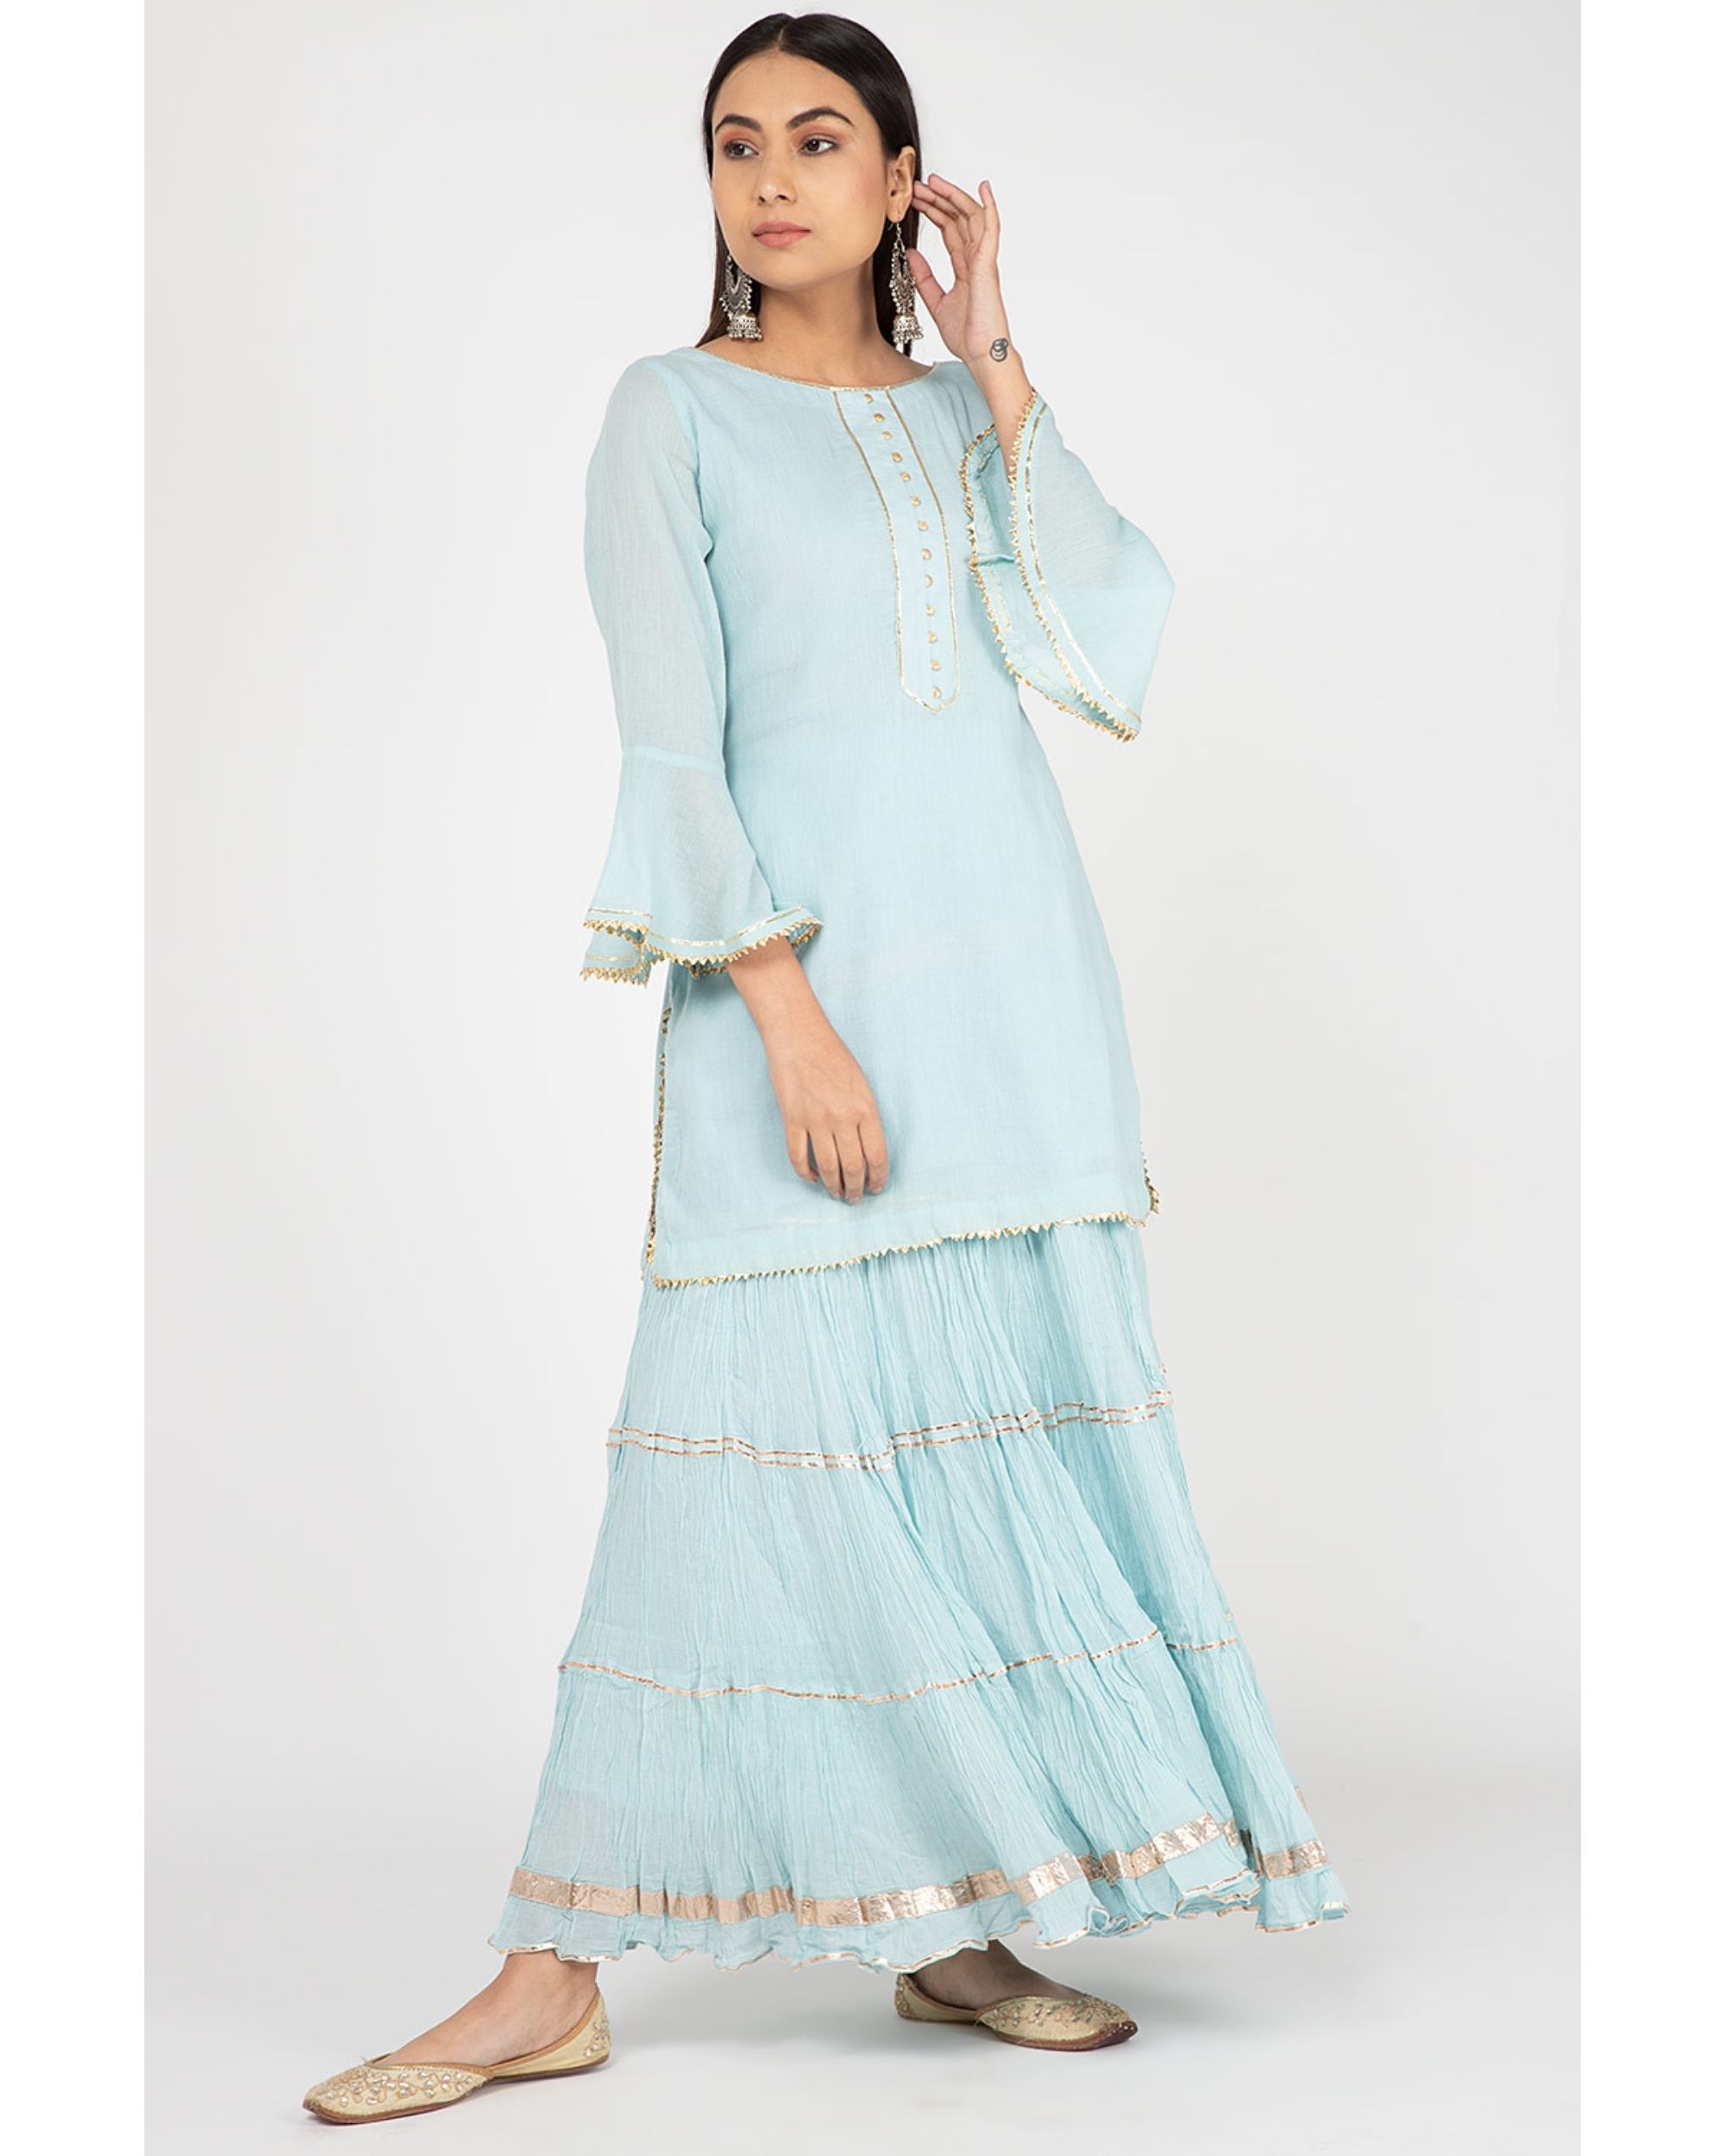 Pastel blue sharara suit set - set of two by Tailoring Lab Designs ...